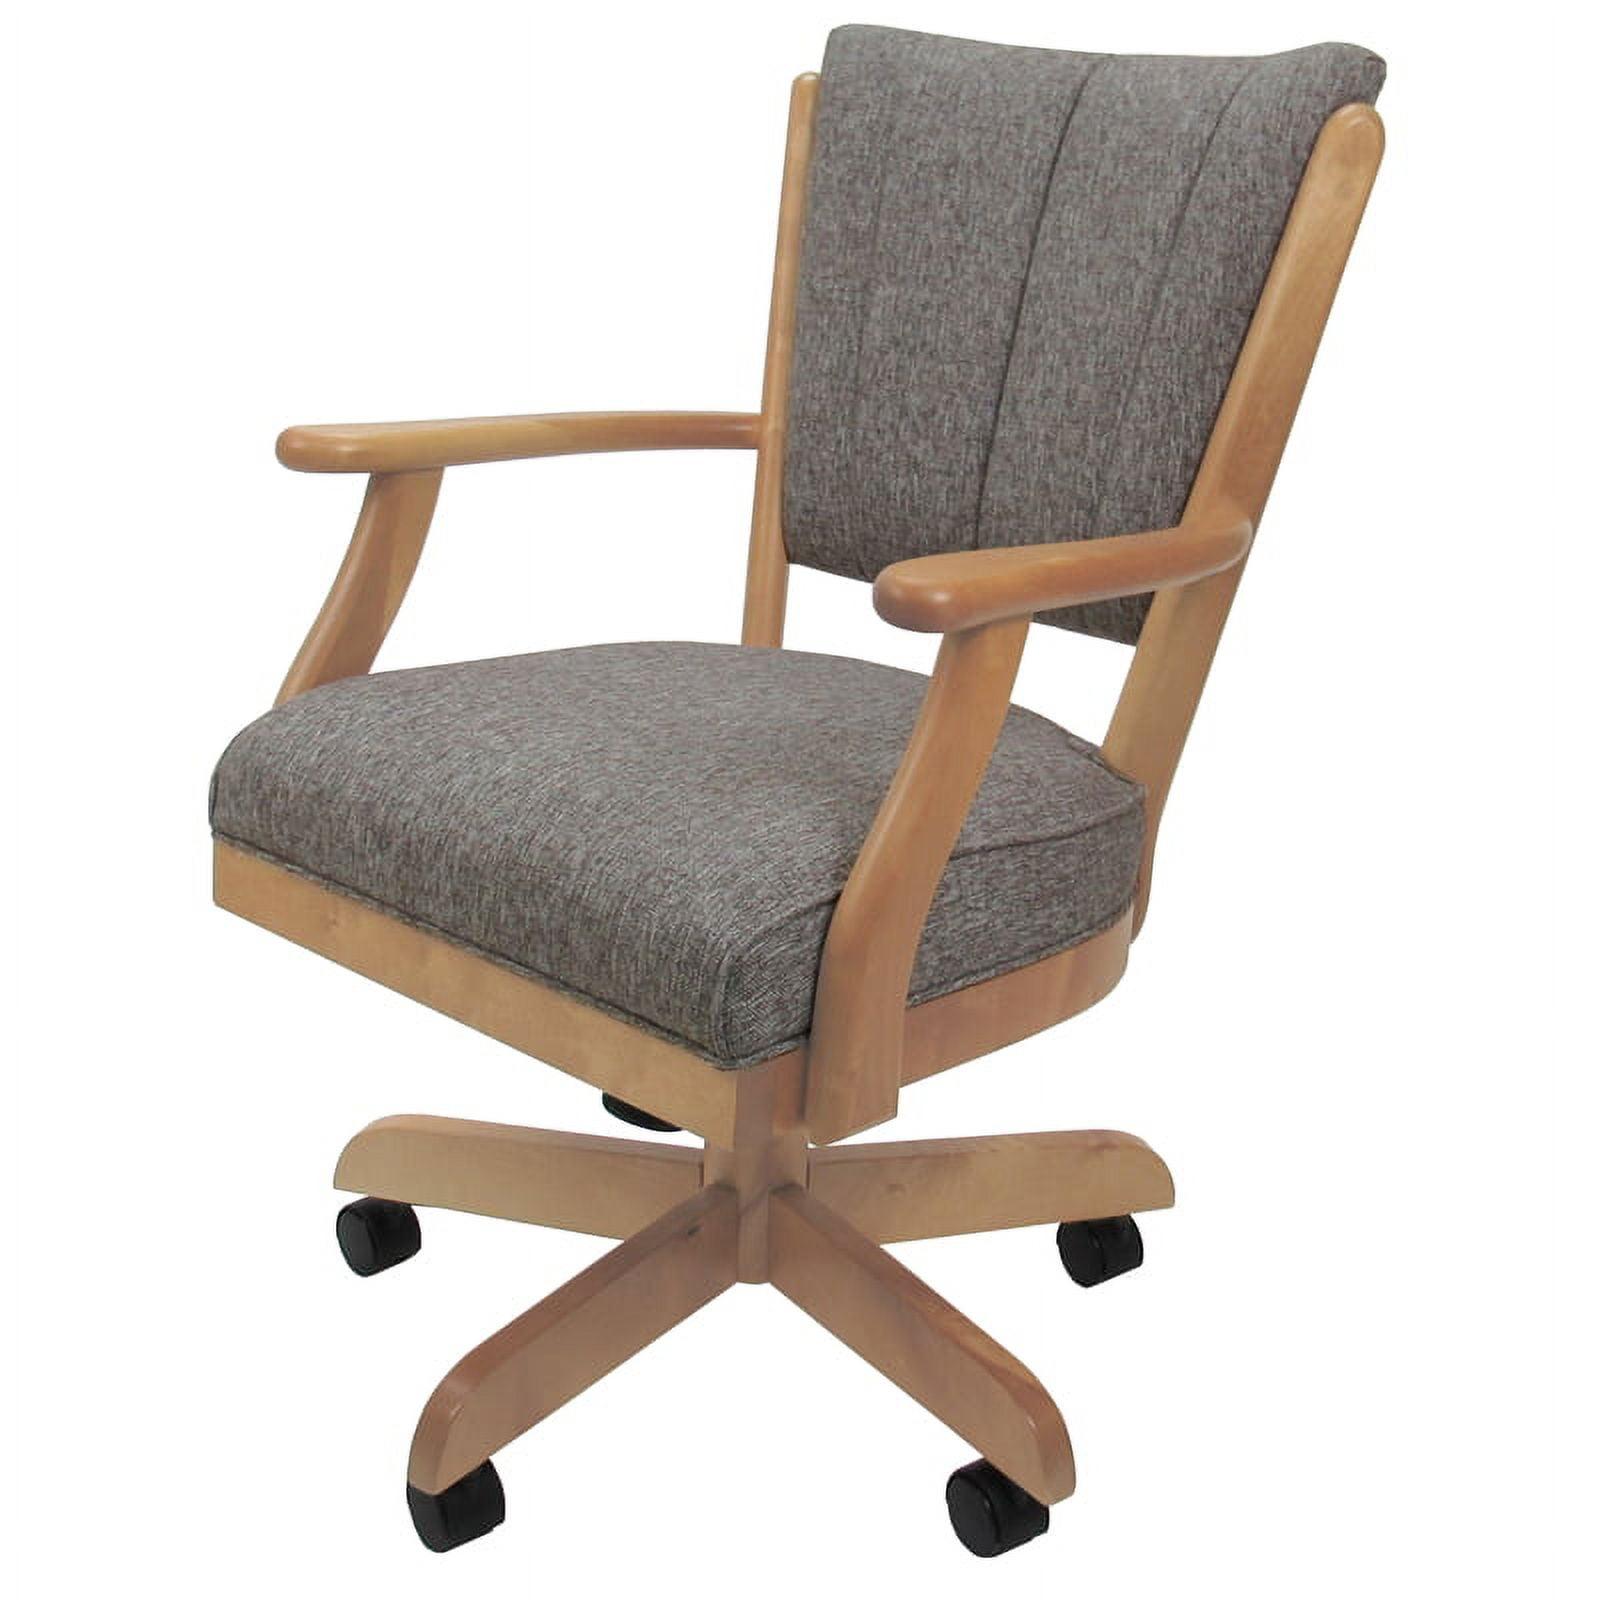 Mojave Gray Swivel Seat Upholstered Dining Chair with Birch Wood Frame